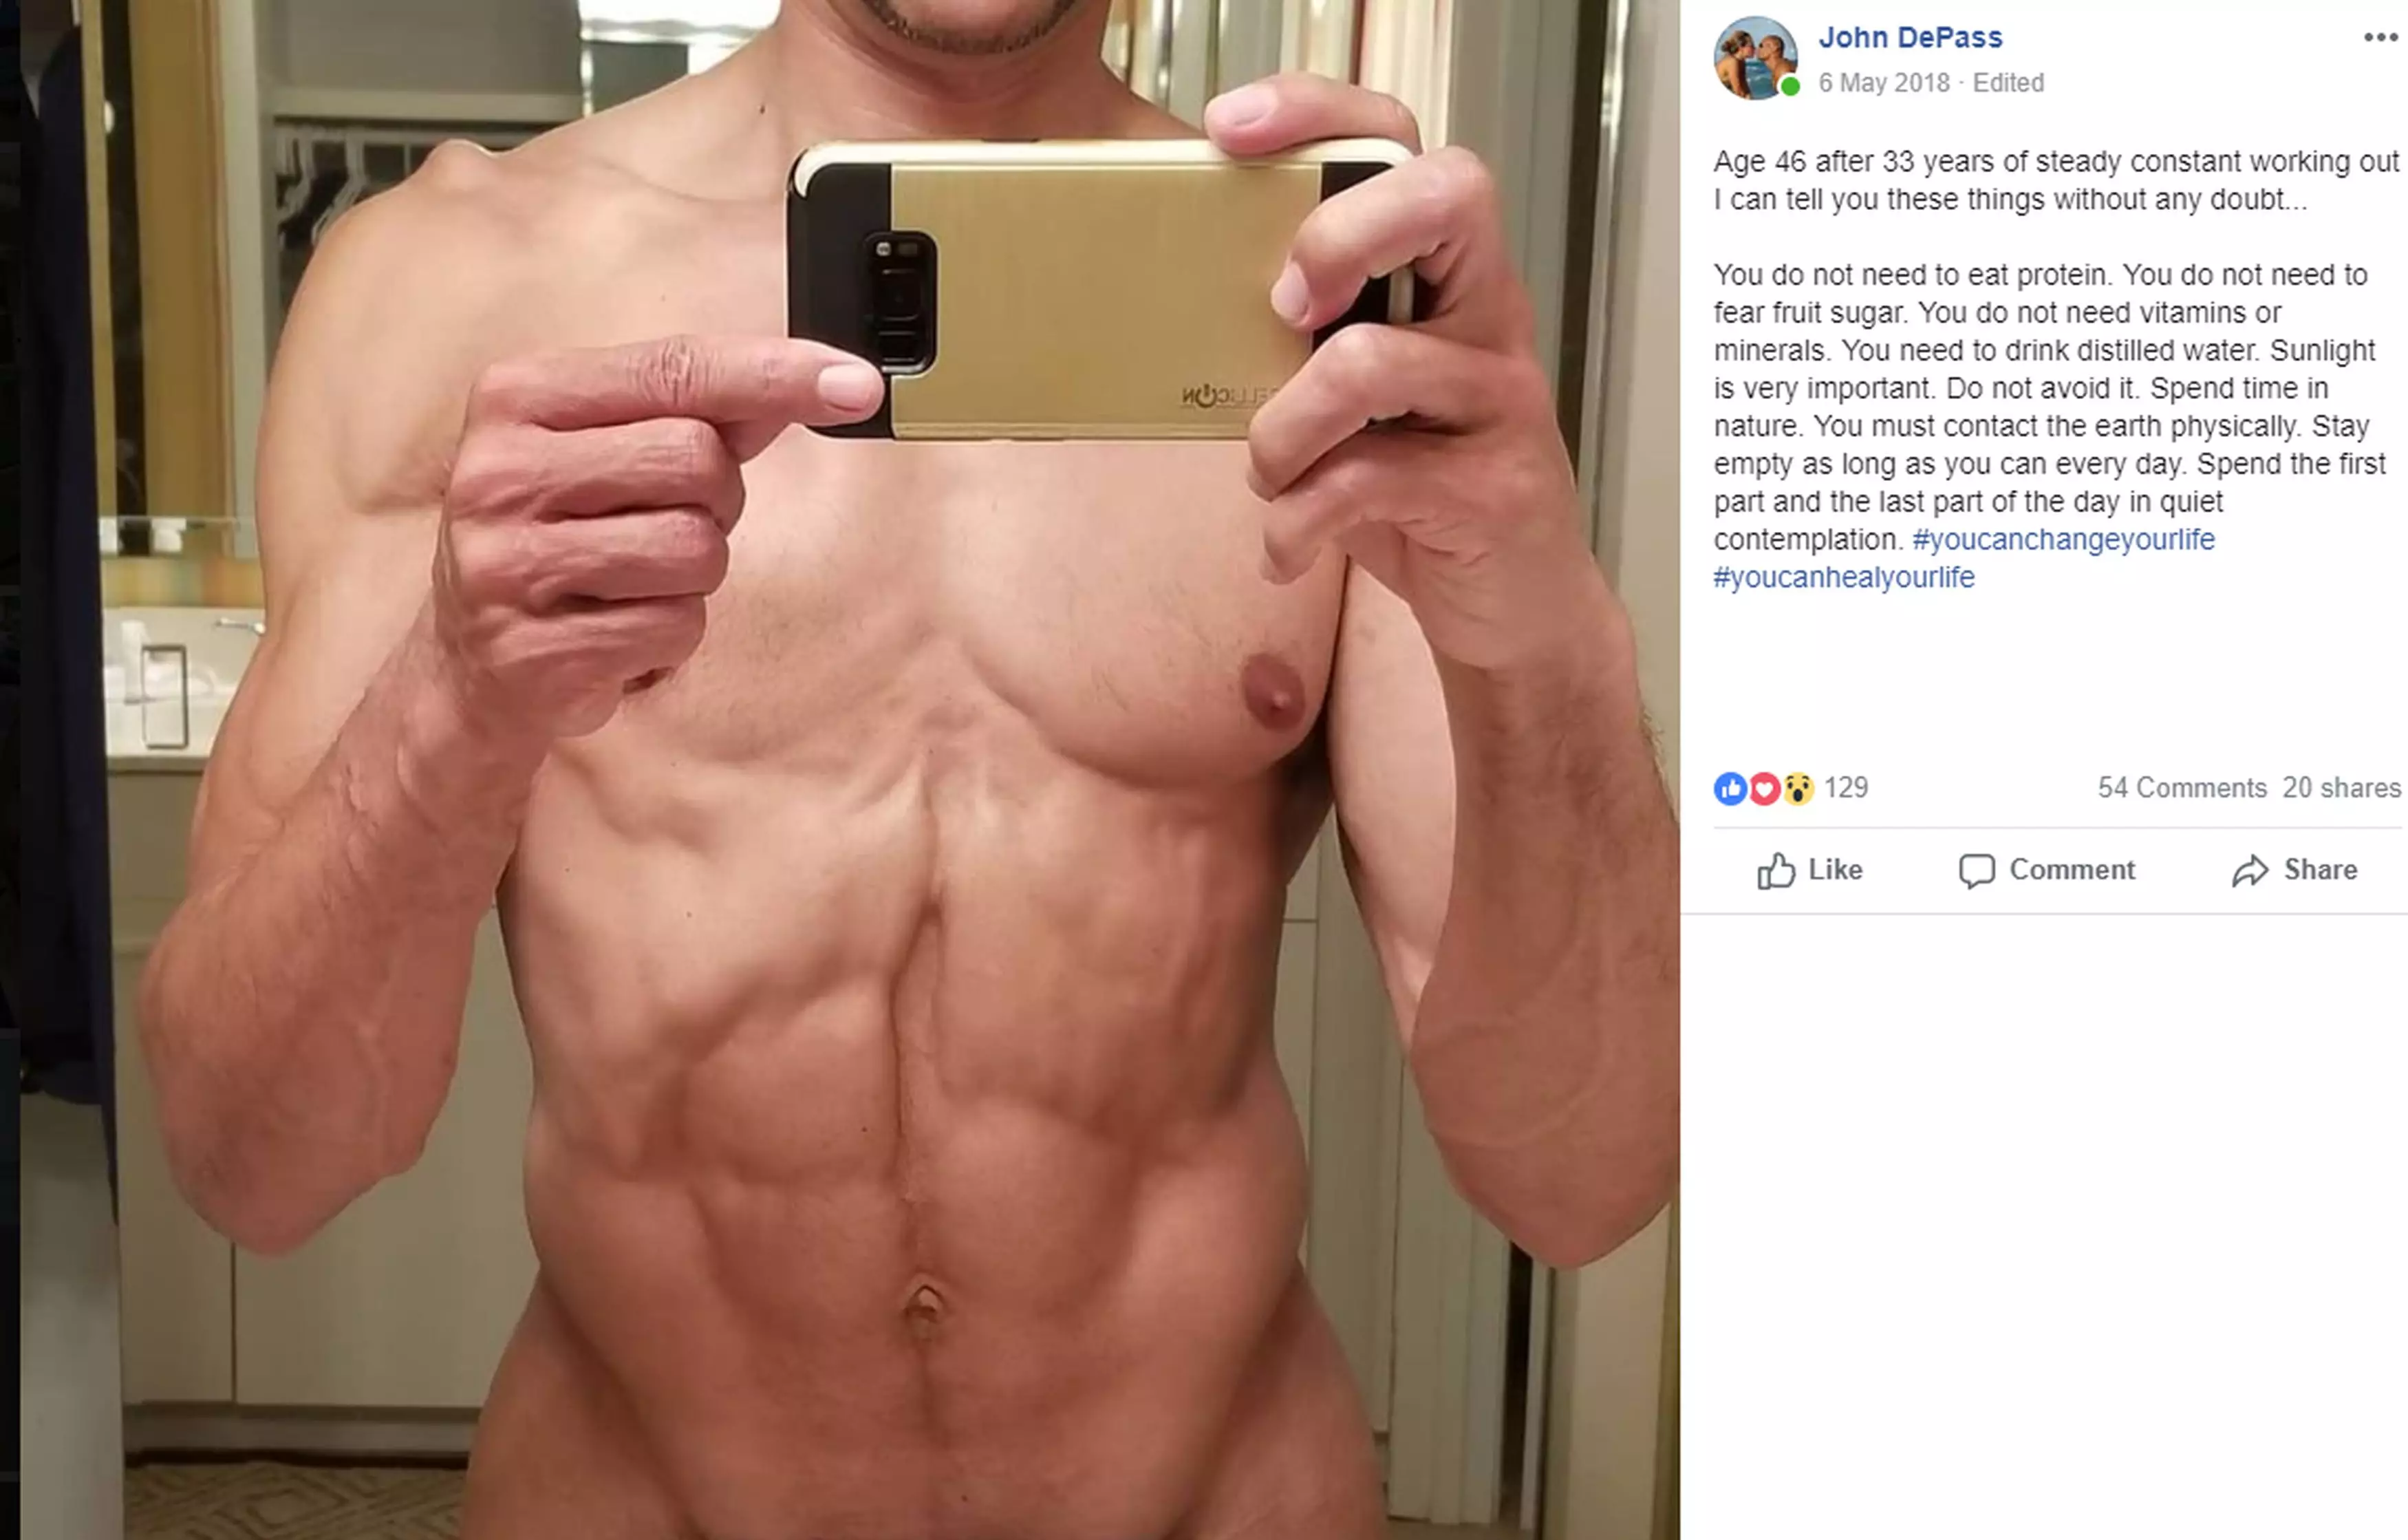 John's Facebook post claims that humans don't need protein and vitamins.